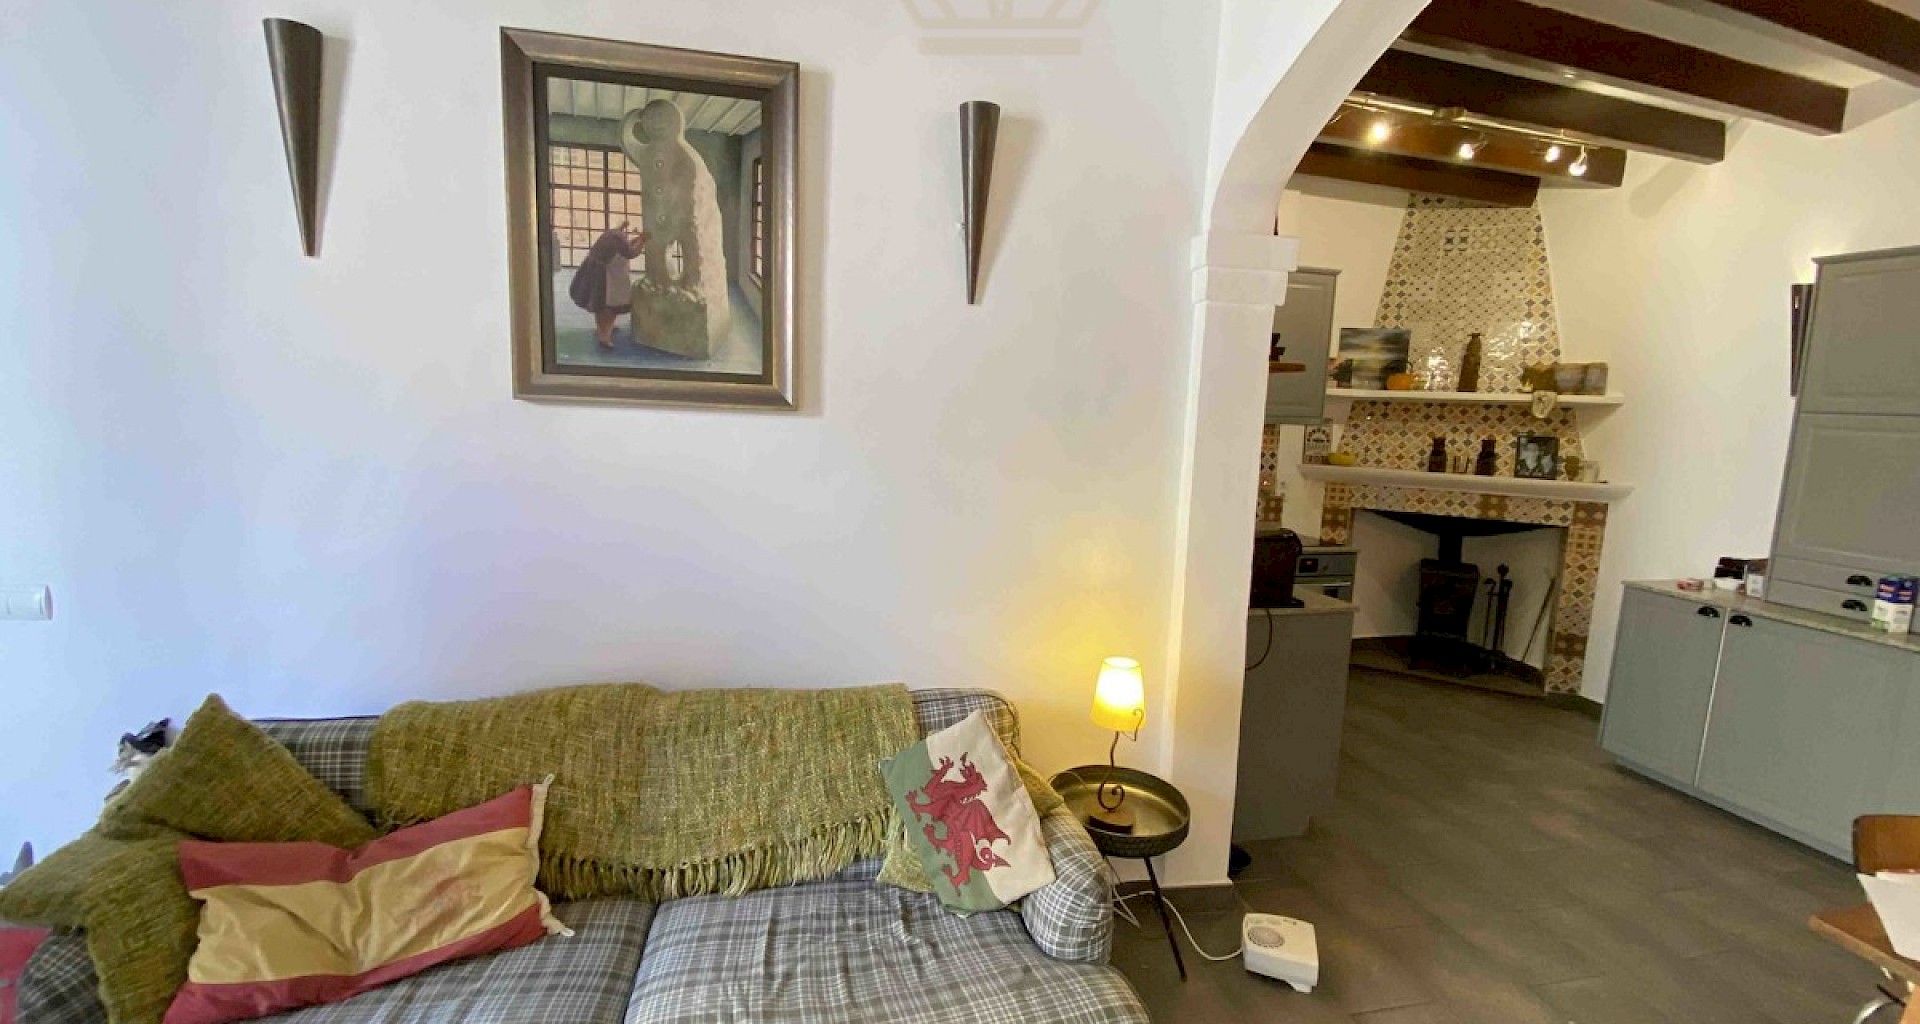 KROHN & LUEDEMANN Cosy townhouse in Andratx village with charming character Mallorquinisches Stadthaus in Andratx